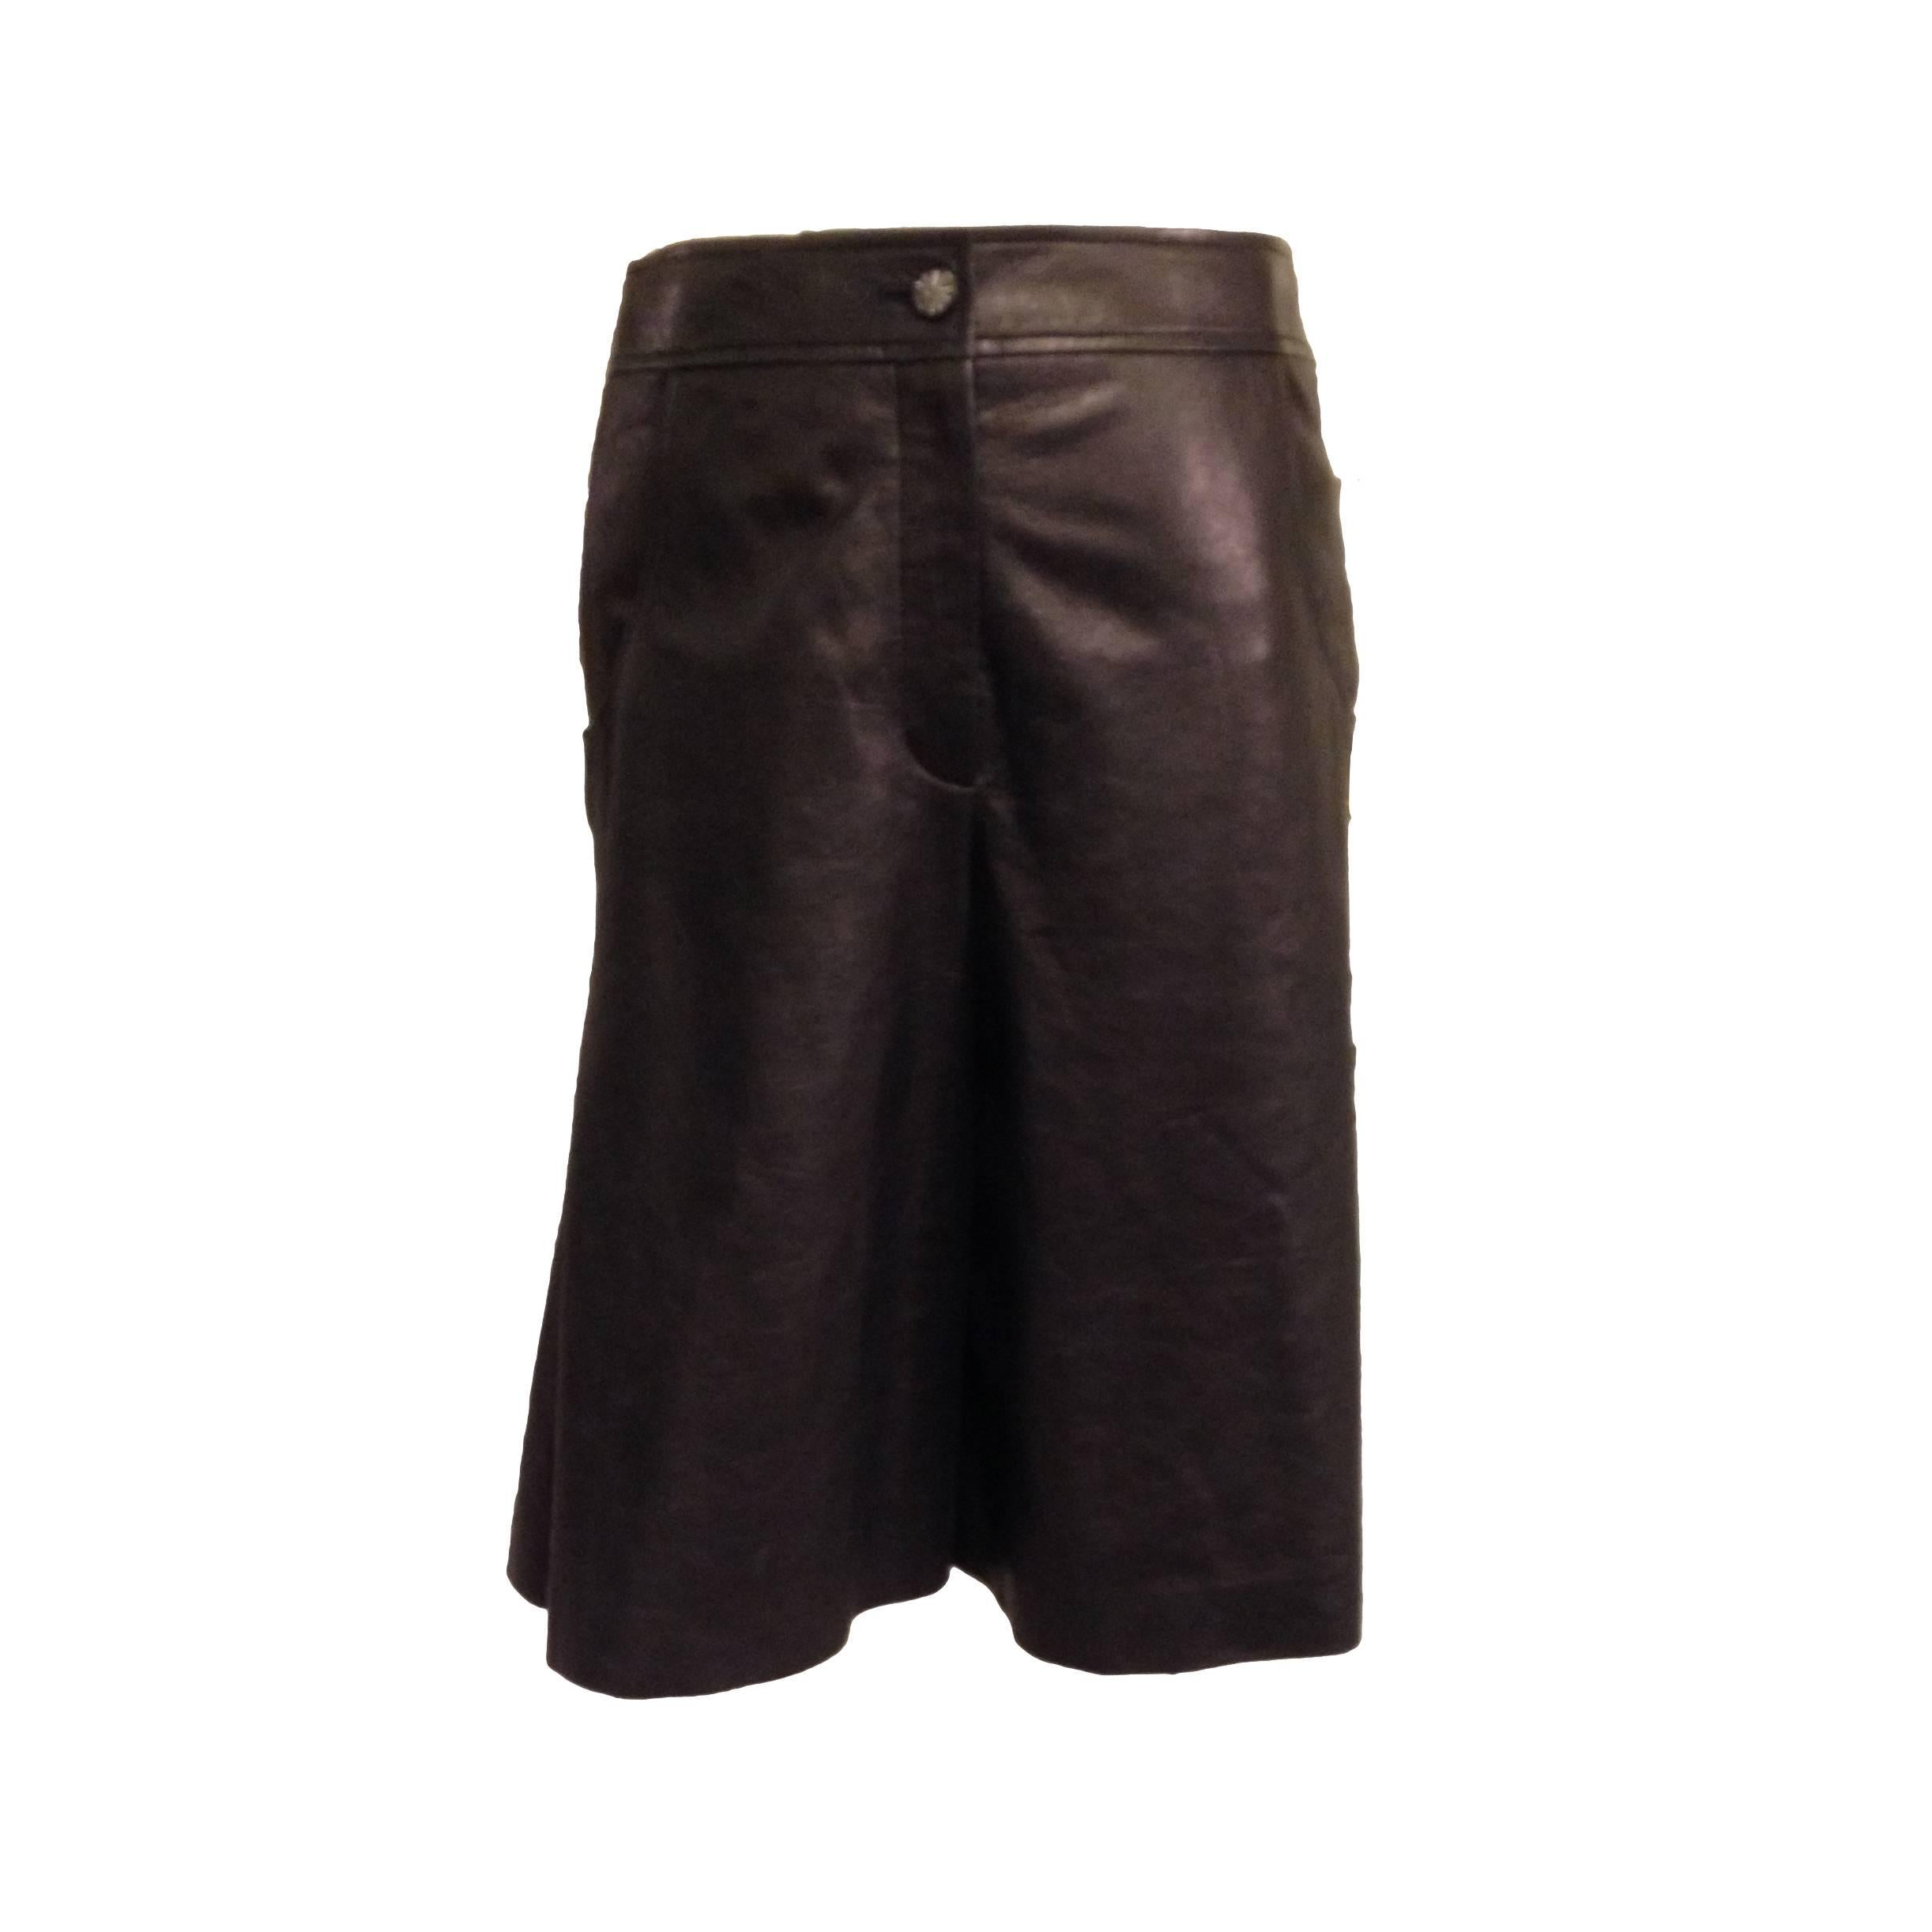 Chanel Black Leather Culottes Size 42 (10) For Sale